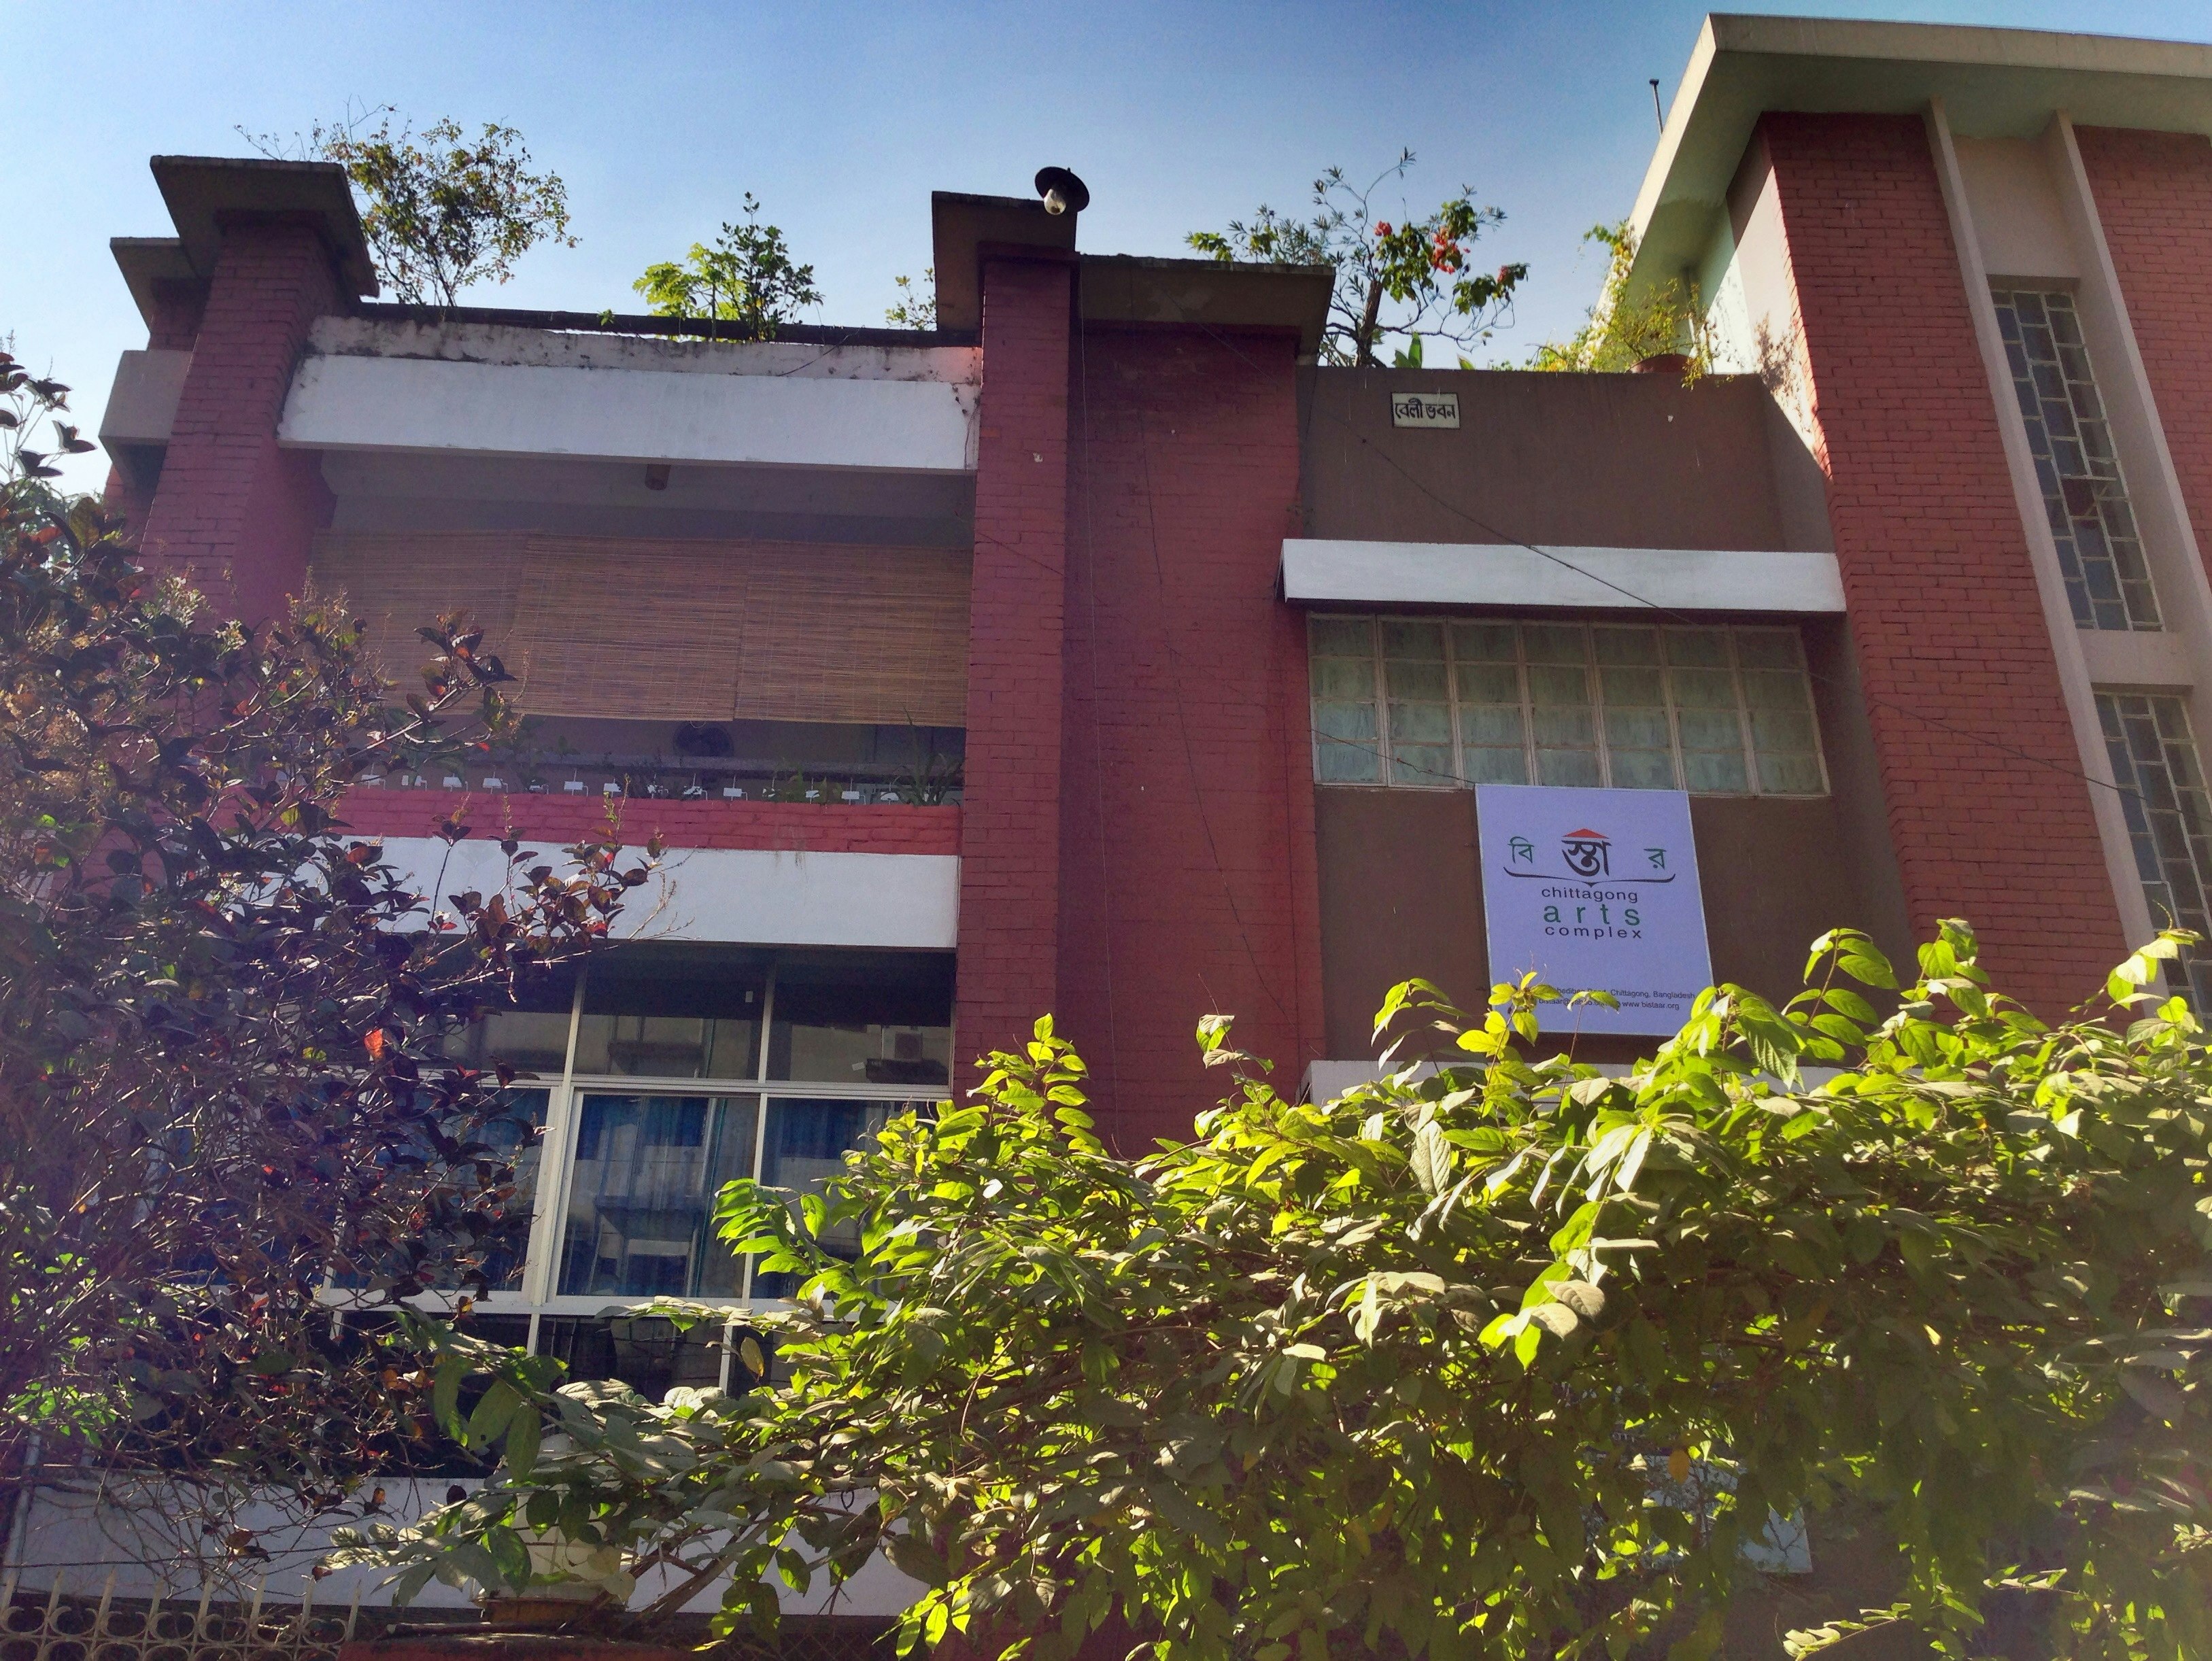 A facade of a red brick and concrete building, with the sign 'Chittagong Arts Complex' installed under one window.